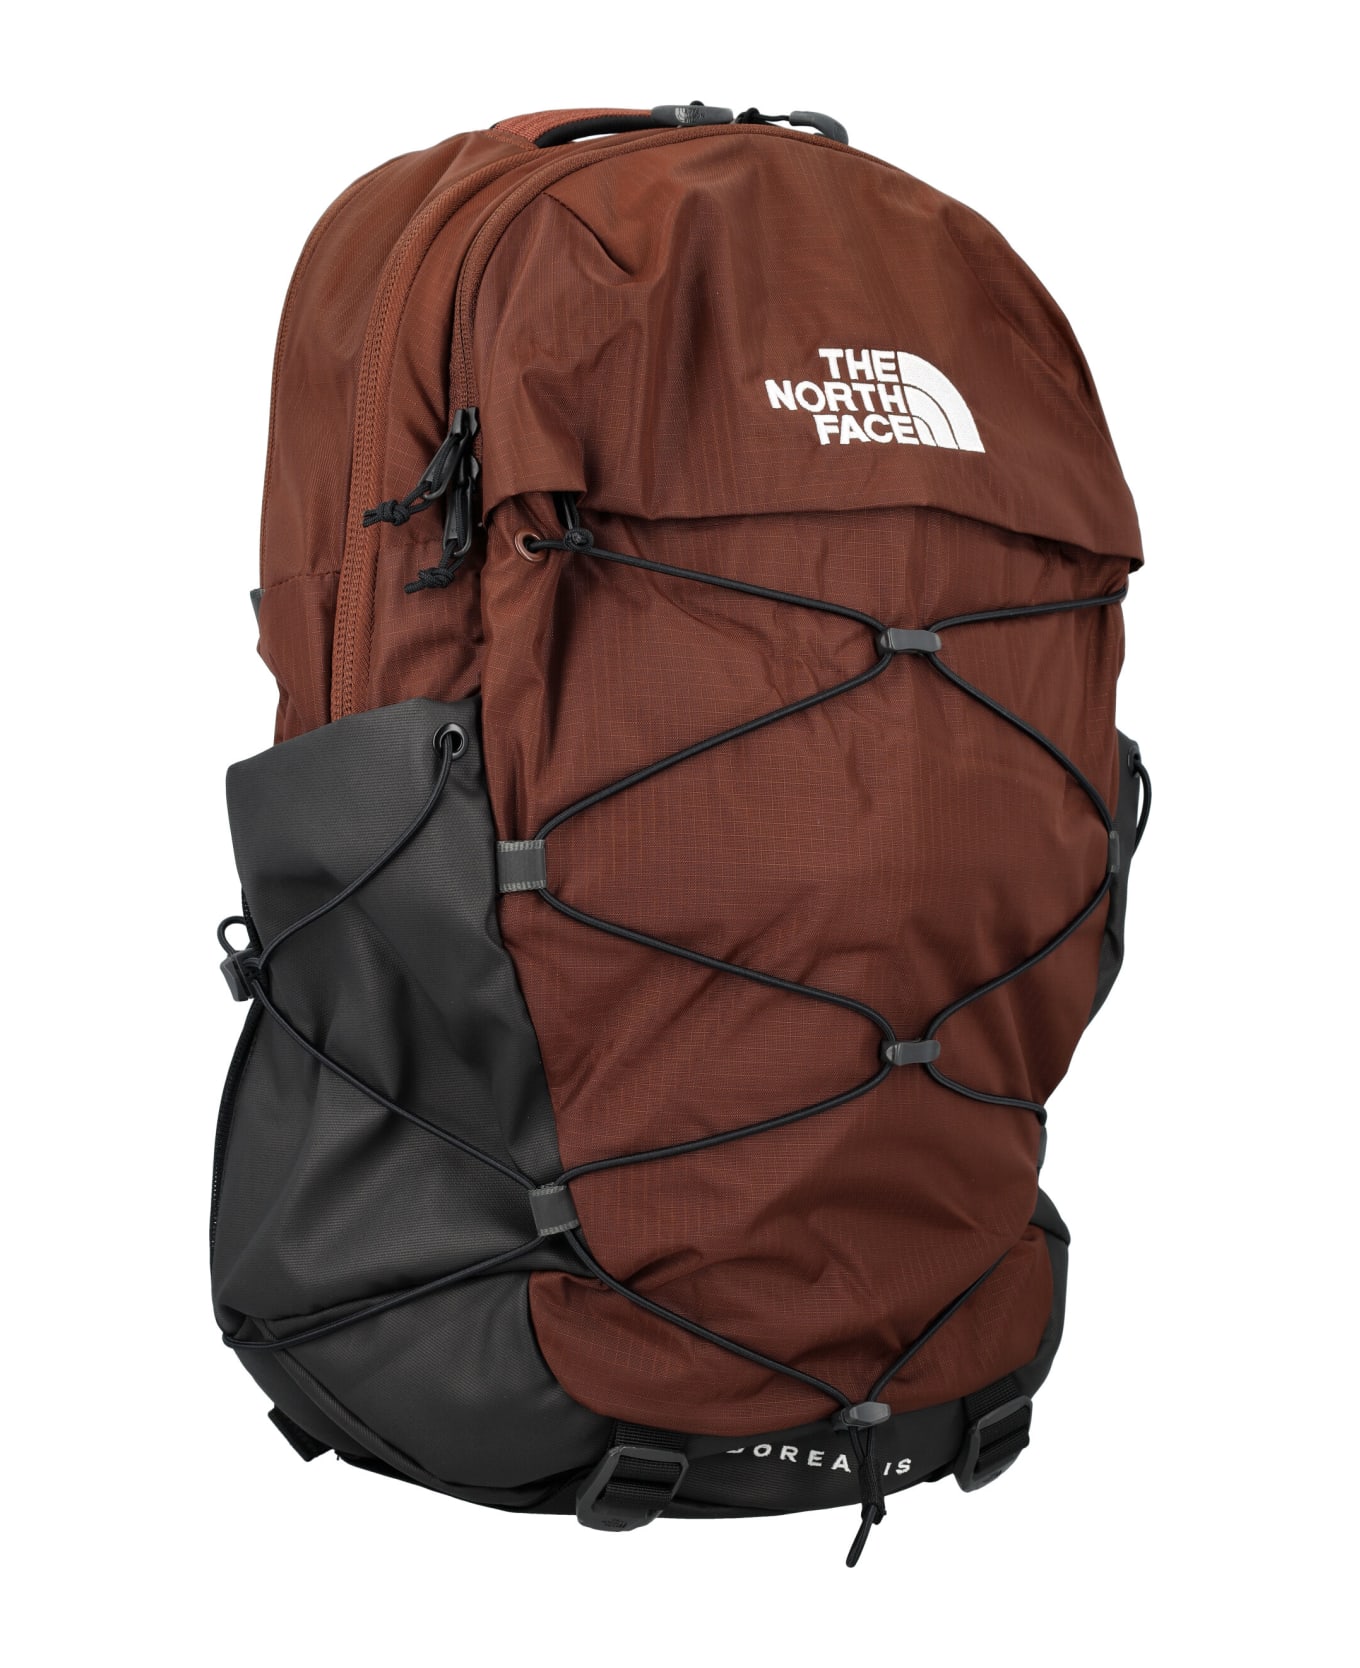 The North Face Borealis Backpack - BROWN バックパック